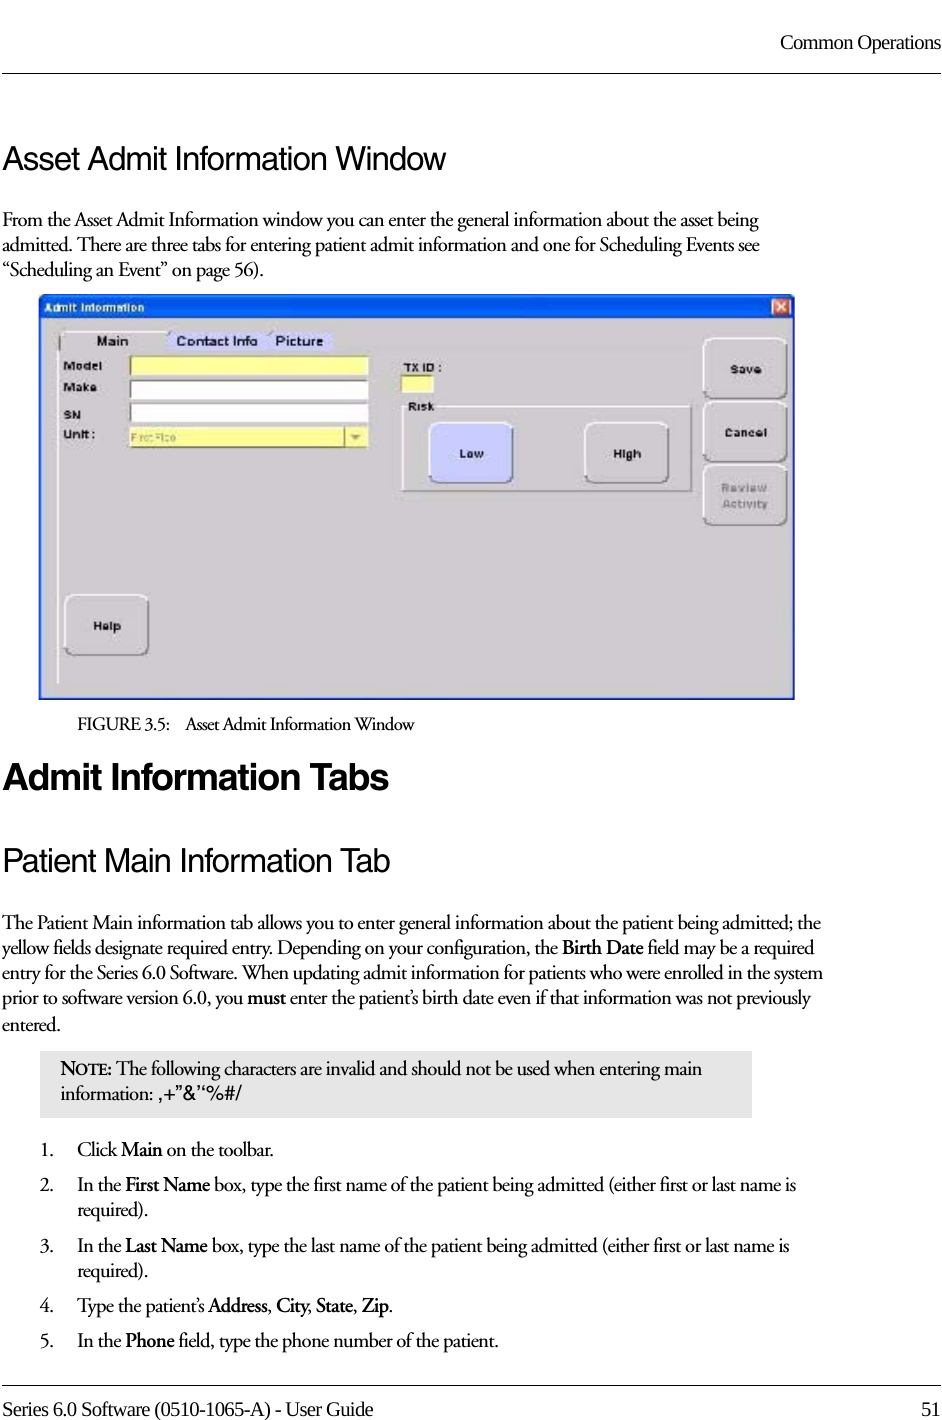 Series 6.0 Software (0510-1065-A) - User Guide  51Common OperationsAsset Admit Information WindowFrom the Asset Admit Information window you can enter the general information about the asset being admitted. There are three tabs for entering patient admit information and one for Scheduling Events see “Scheduling an Event” on page 56). FIGURE 3.5:    Asset Admit Information WindowAdmit Information TabsPatient Main Information TabThe Patient Main information tab allows you to enter general information about the patient being admitted; the yellow fields designate required entry. Depending on your configuration, the Birth Date field may be a required entry for the Series 6.0 Software. When updating admit information for patients who were enrolled in the system prior to software version 6.0, you must enter the patient’s birth date even if that information was not previously entered. 1.    Click Main on the toolbar.2.    In the First Name box, type the first name of the patient being admitted (either first or last name is required). 3.    In the Last Name box, type the last name of the patient being admitted (either first or last name is required).4.    Type the patient’s Address, City, State, Zip.5.    In the Phone field, type the phone number of the patient.NOTE: The following characters are invalid and should not be used when entering main information: ,+”&amp;’‘%#/